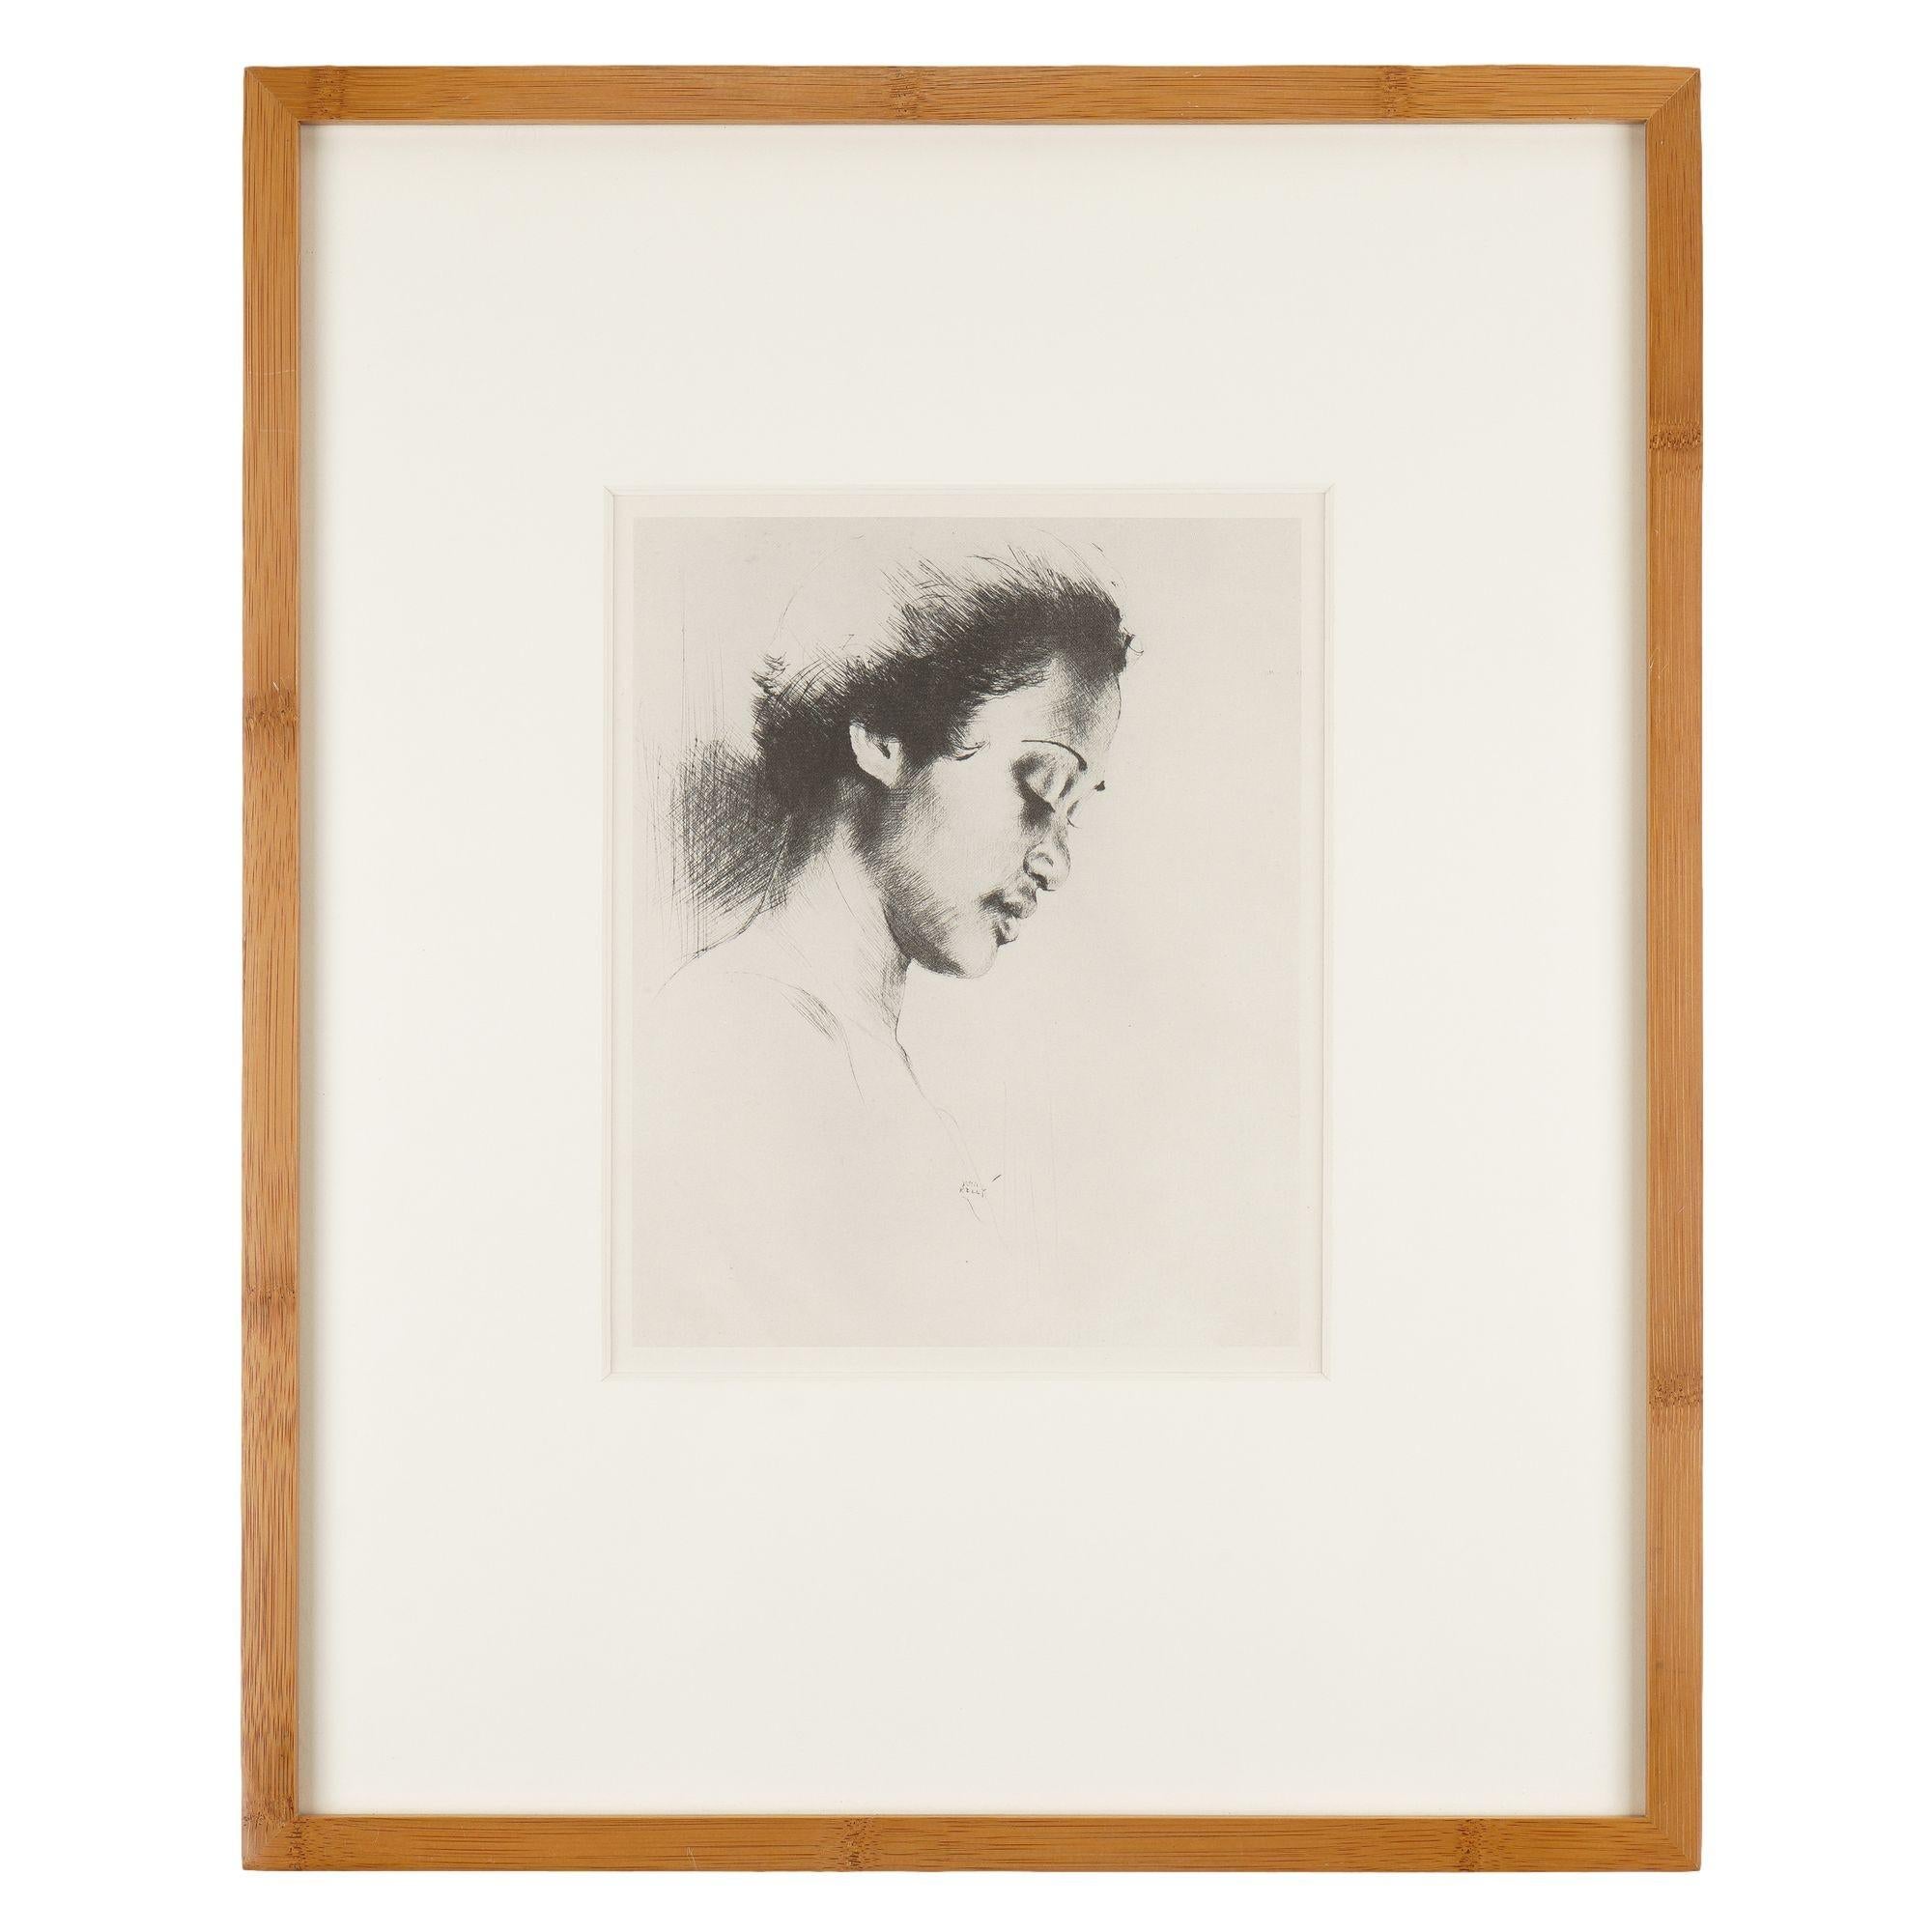 Pair of lithographs titled “Lellani” and “Mokihana,” following the 1st edition of Kelly's “Etching of Hawaiians” book. Both lithographs are mounted on archival mat and famed under glass.

Signed in the plate: John Kelly

American, 1943.